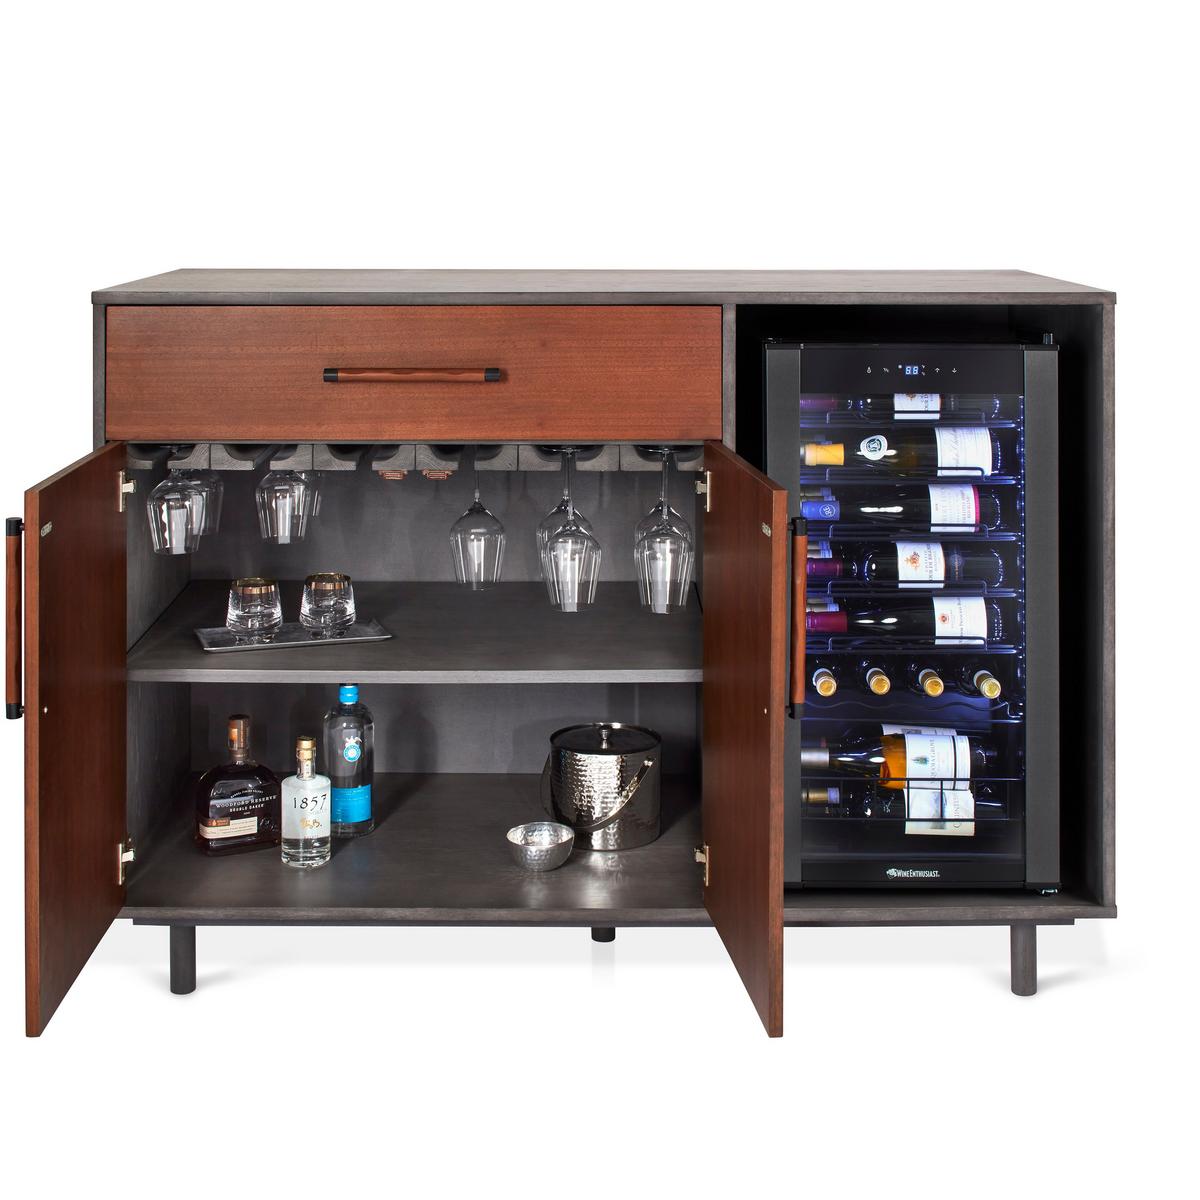 Rhodes Two-Tone Sideboard with Cooling Storage Option - VinoView 28 Bottle Wine Cellar